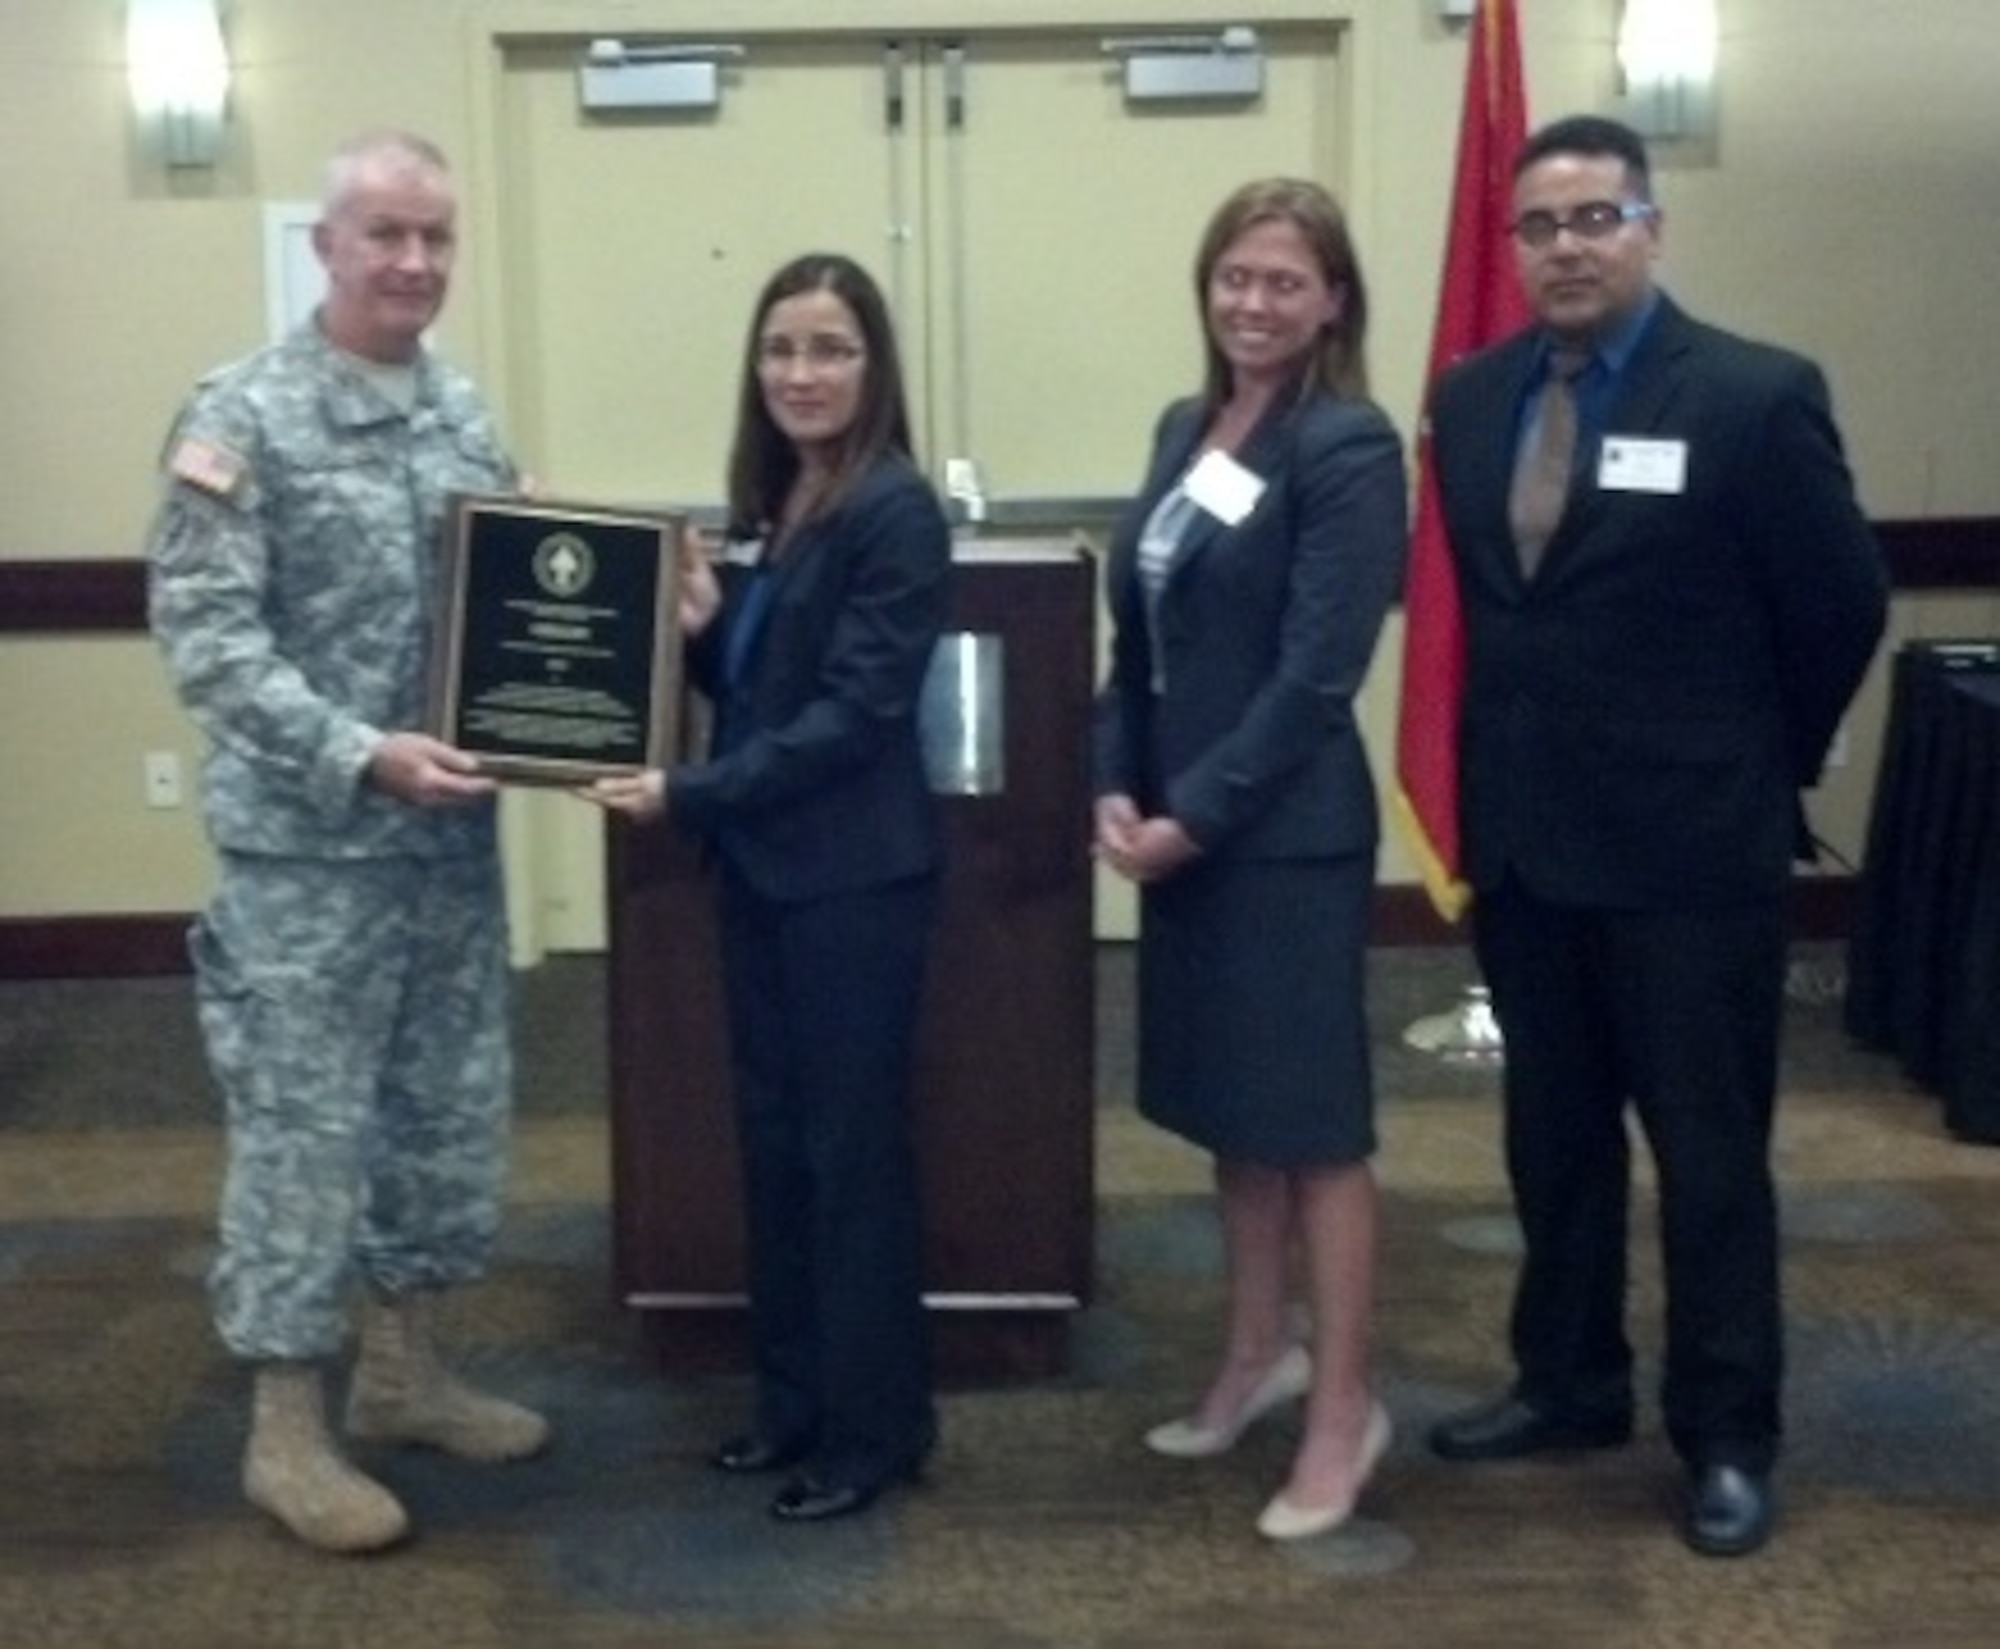 Army Brig. Gen. Sean Mulholland, Special Operations Command South commanding general, presents the Special Operations Command Institutional Language Program of the Year Award to Grisel Mundo-Love, U. S. Air Force Special Operations School Language Center director, Alicia N. Spurling, Air Force Special Operations Command language manager, and Mohammed L. Slassi, Hurlburt Field's Defense Language Institute Language Training Detachment director Aug. 11, 2014, in Tampa, Fla. The USAFSOS Language Center at Hurlburt Field, Fla., won the language program award for its achievements between July 31, 2013 and Aug. 1, 2014.  This is the second time the school has taken this honor.  (Courtesy photo)